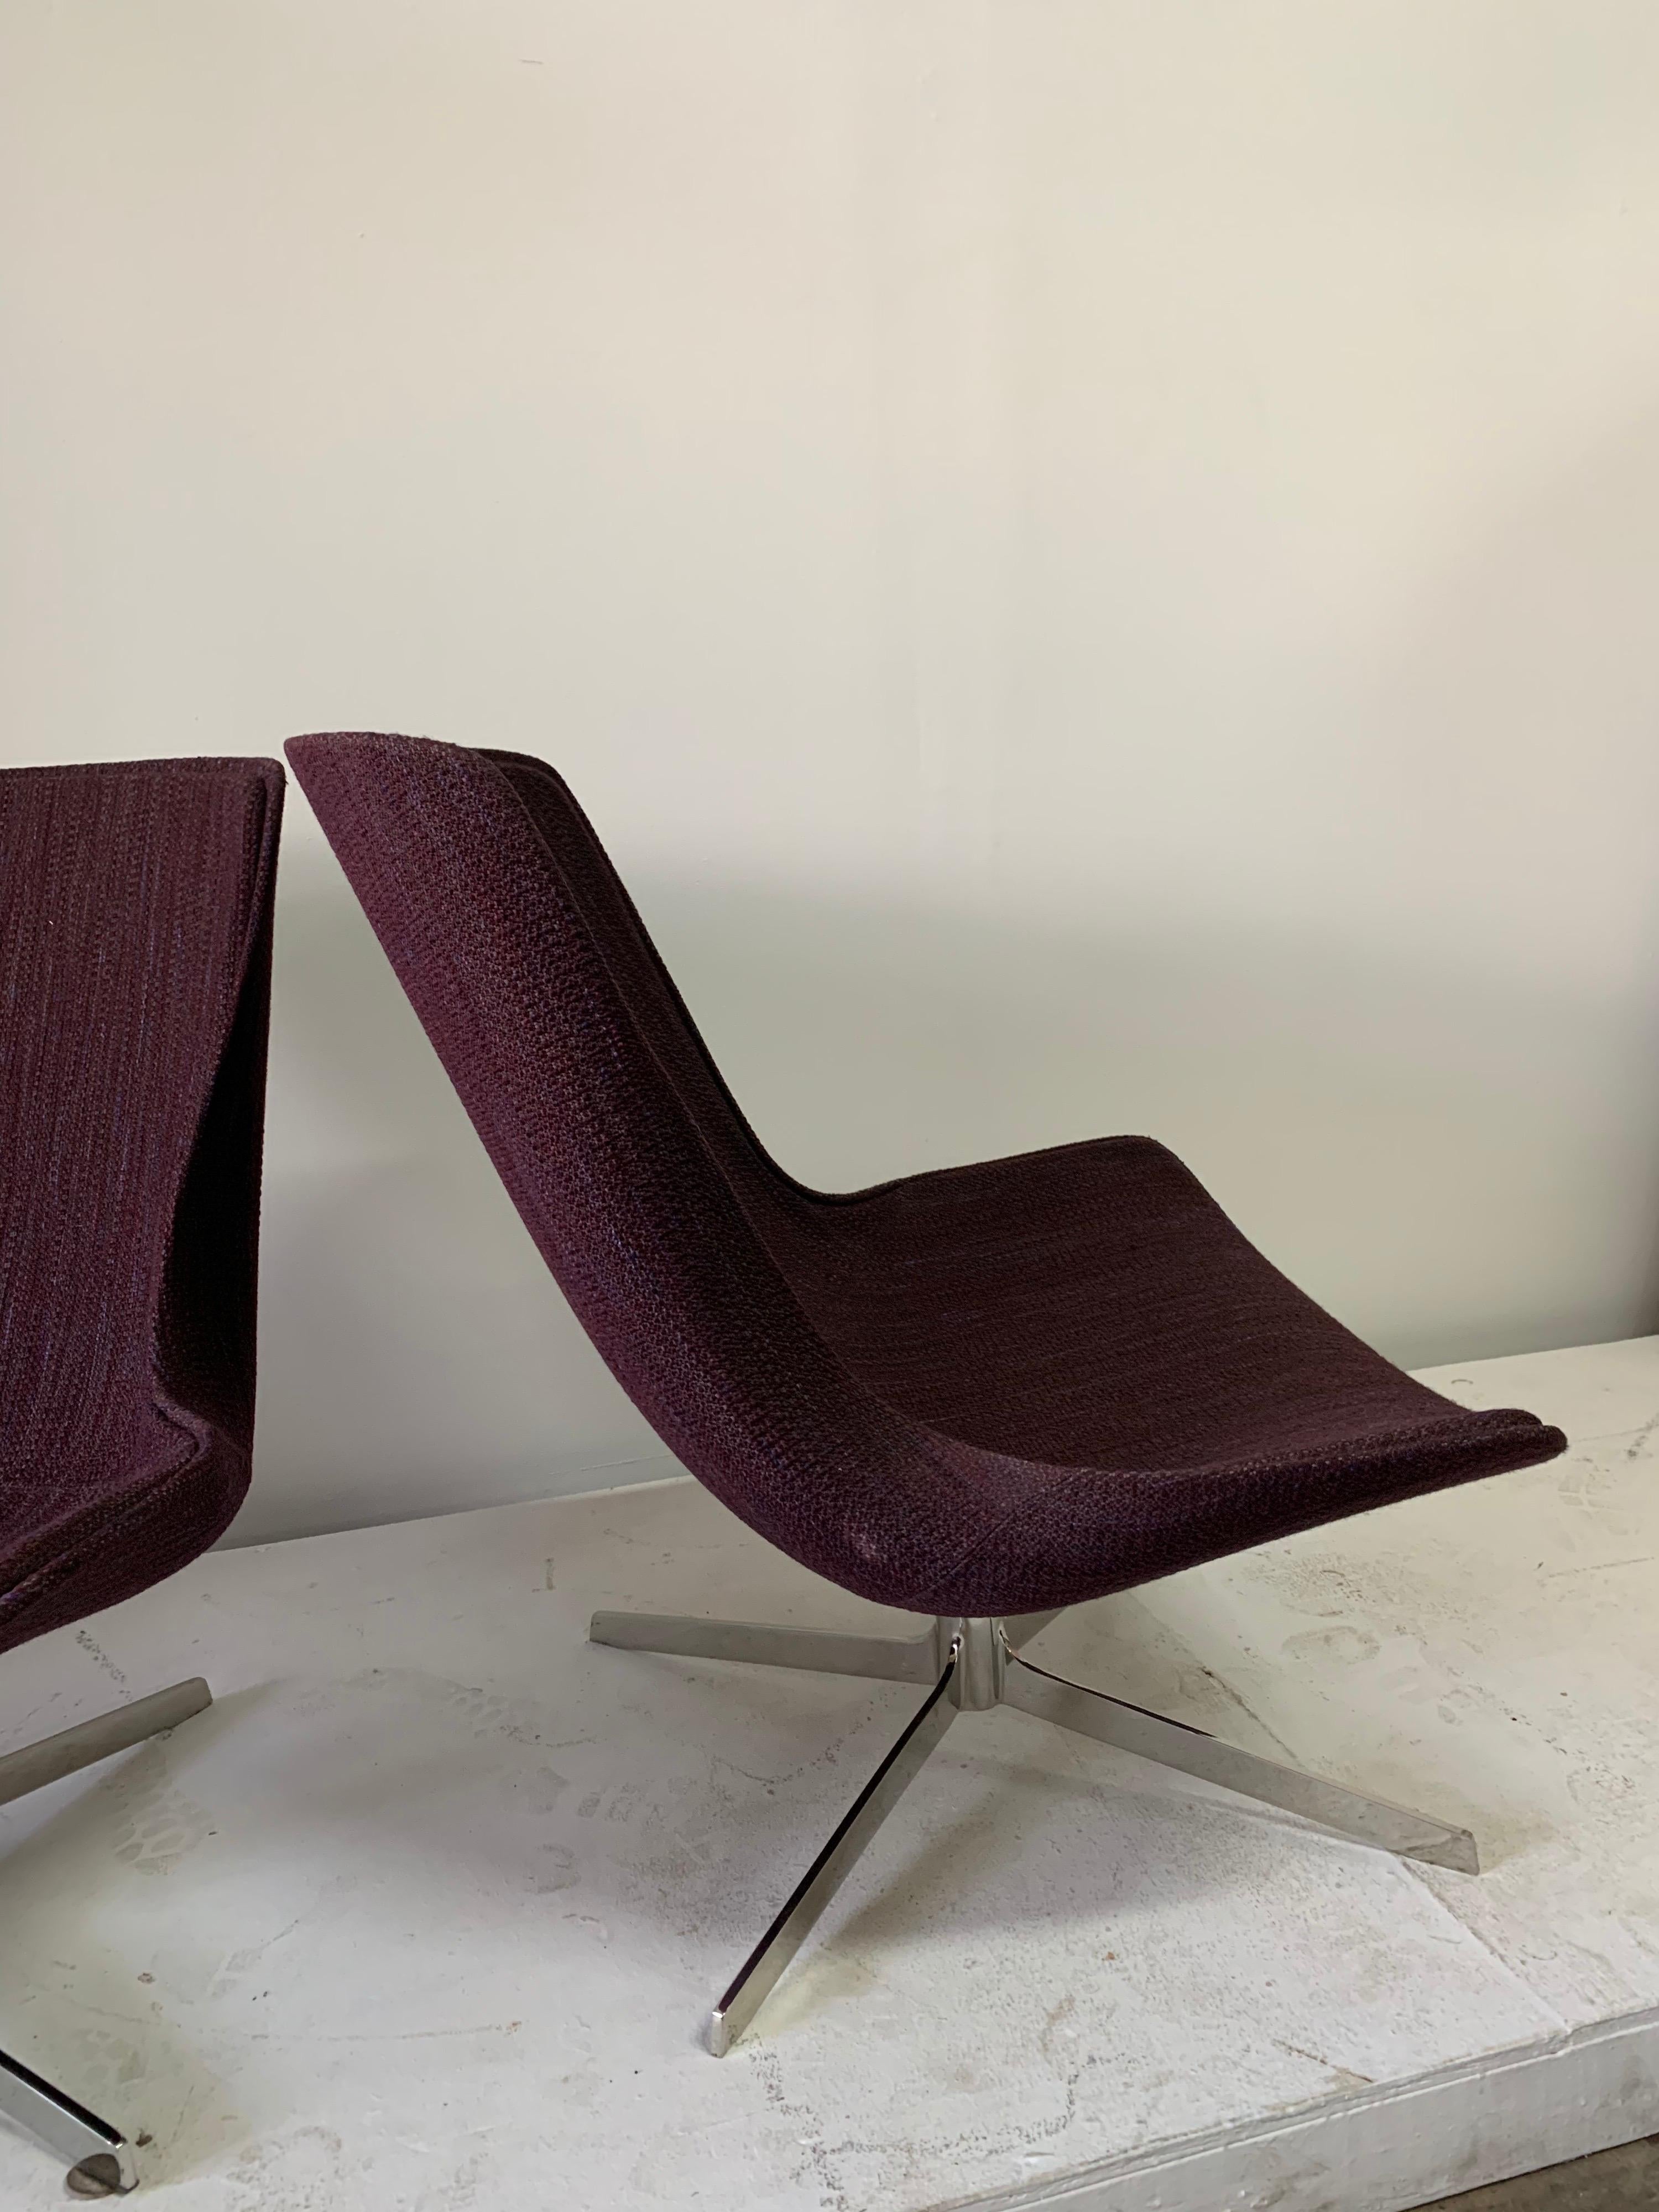 Nicos Zographos Style Midcentury Swivel Chairs, Pair For Sale 2